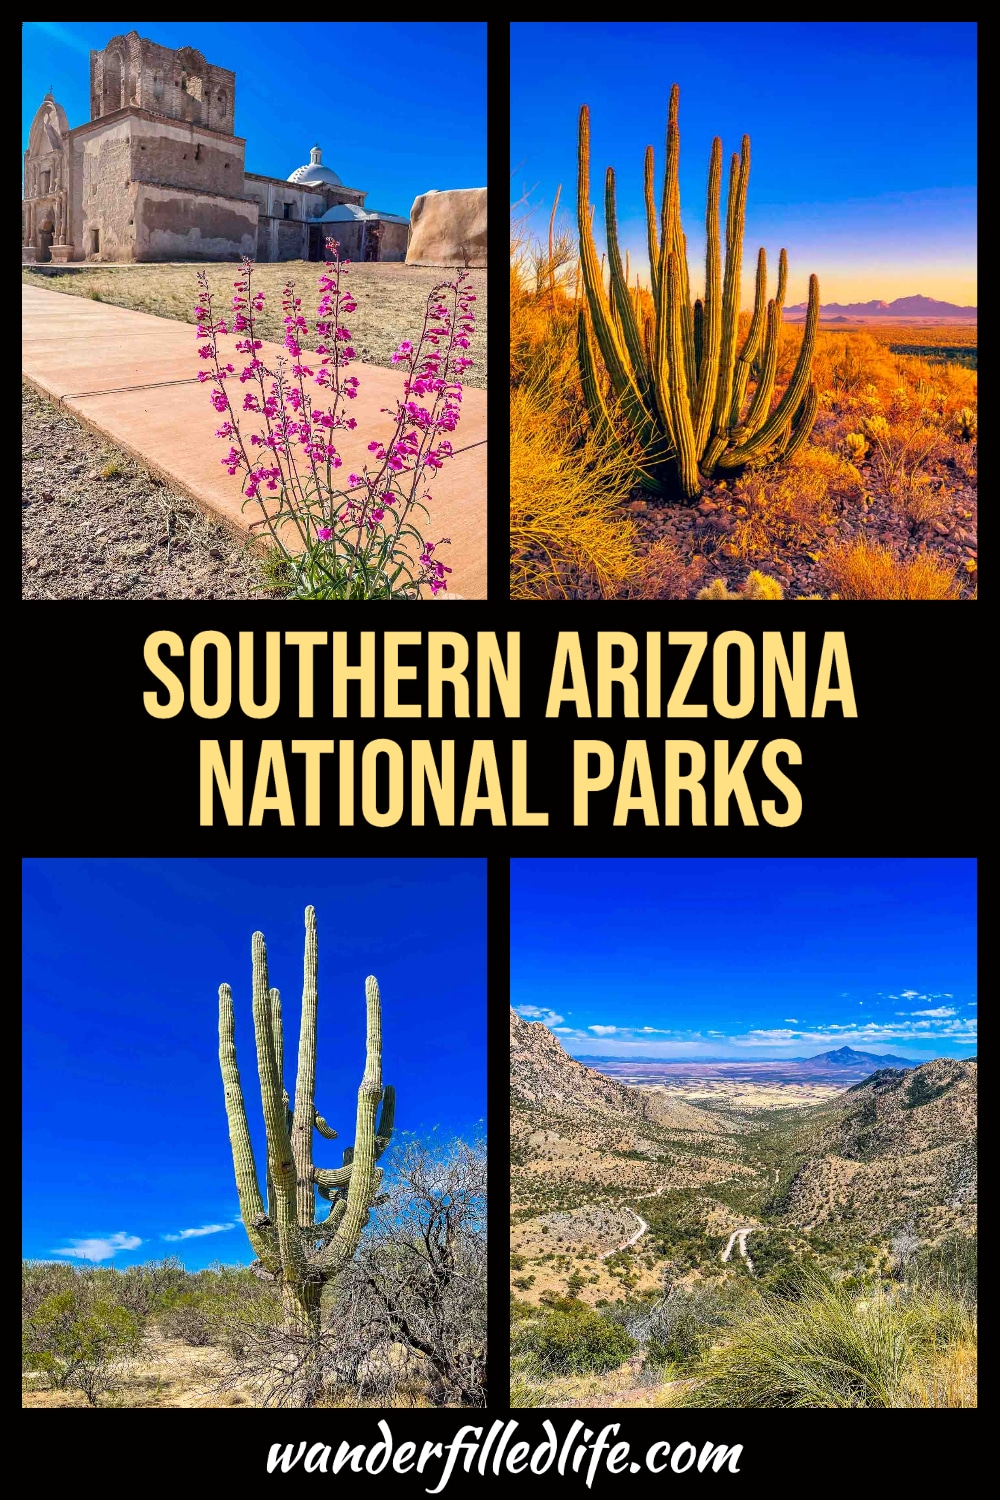 Southern Arizona national parks are a bevy of natural beauty, cultural treasures and surprising biological diversity, well worth a visit.